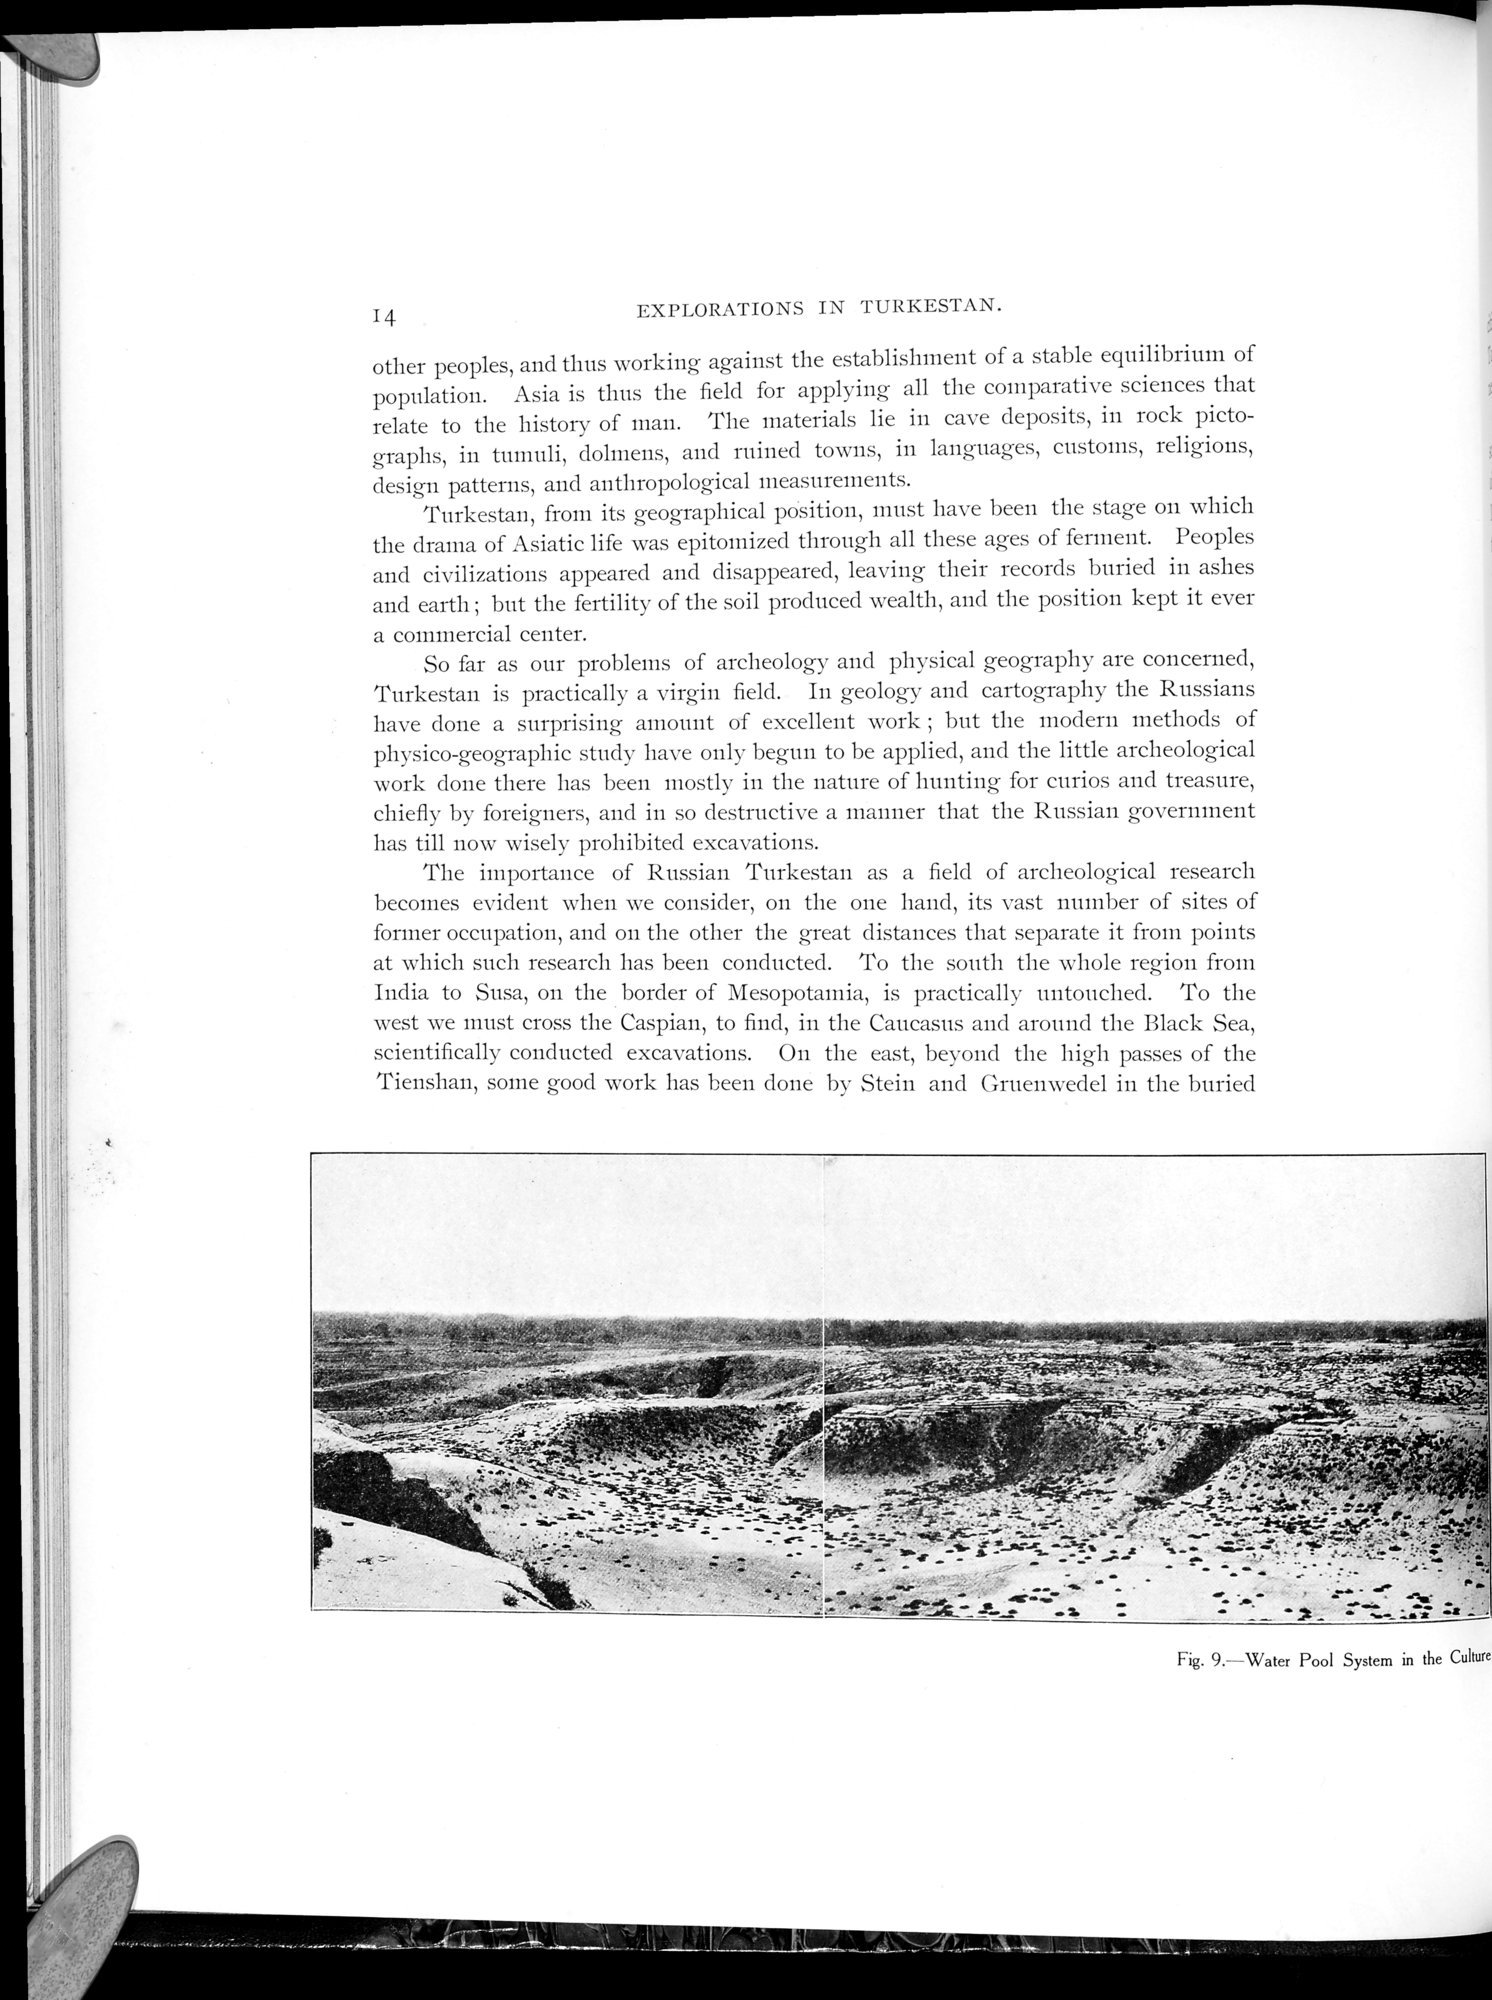 Explorations in Turkestan 1903 : vol.1 / Page 38 (Grayscale High Resolution Image)